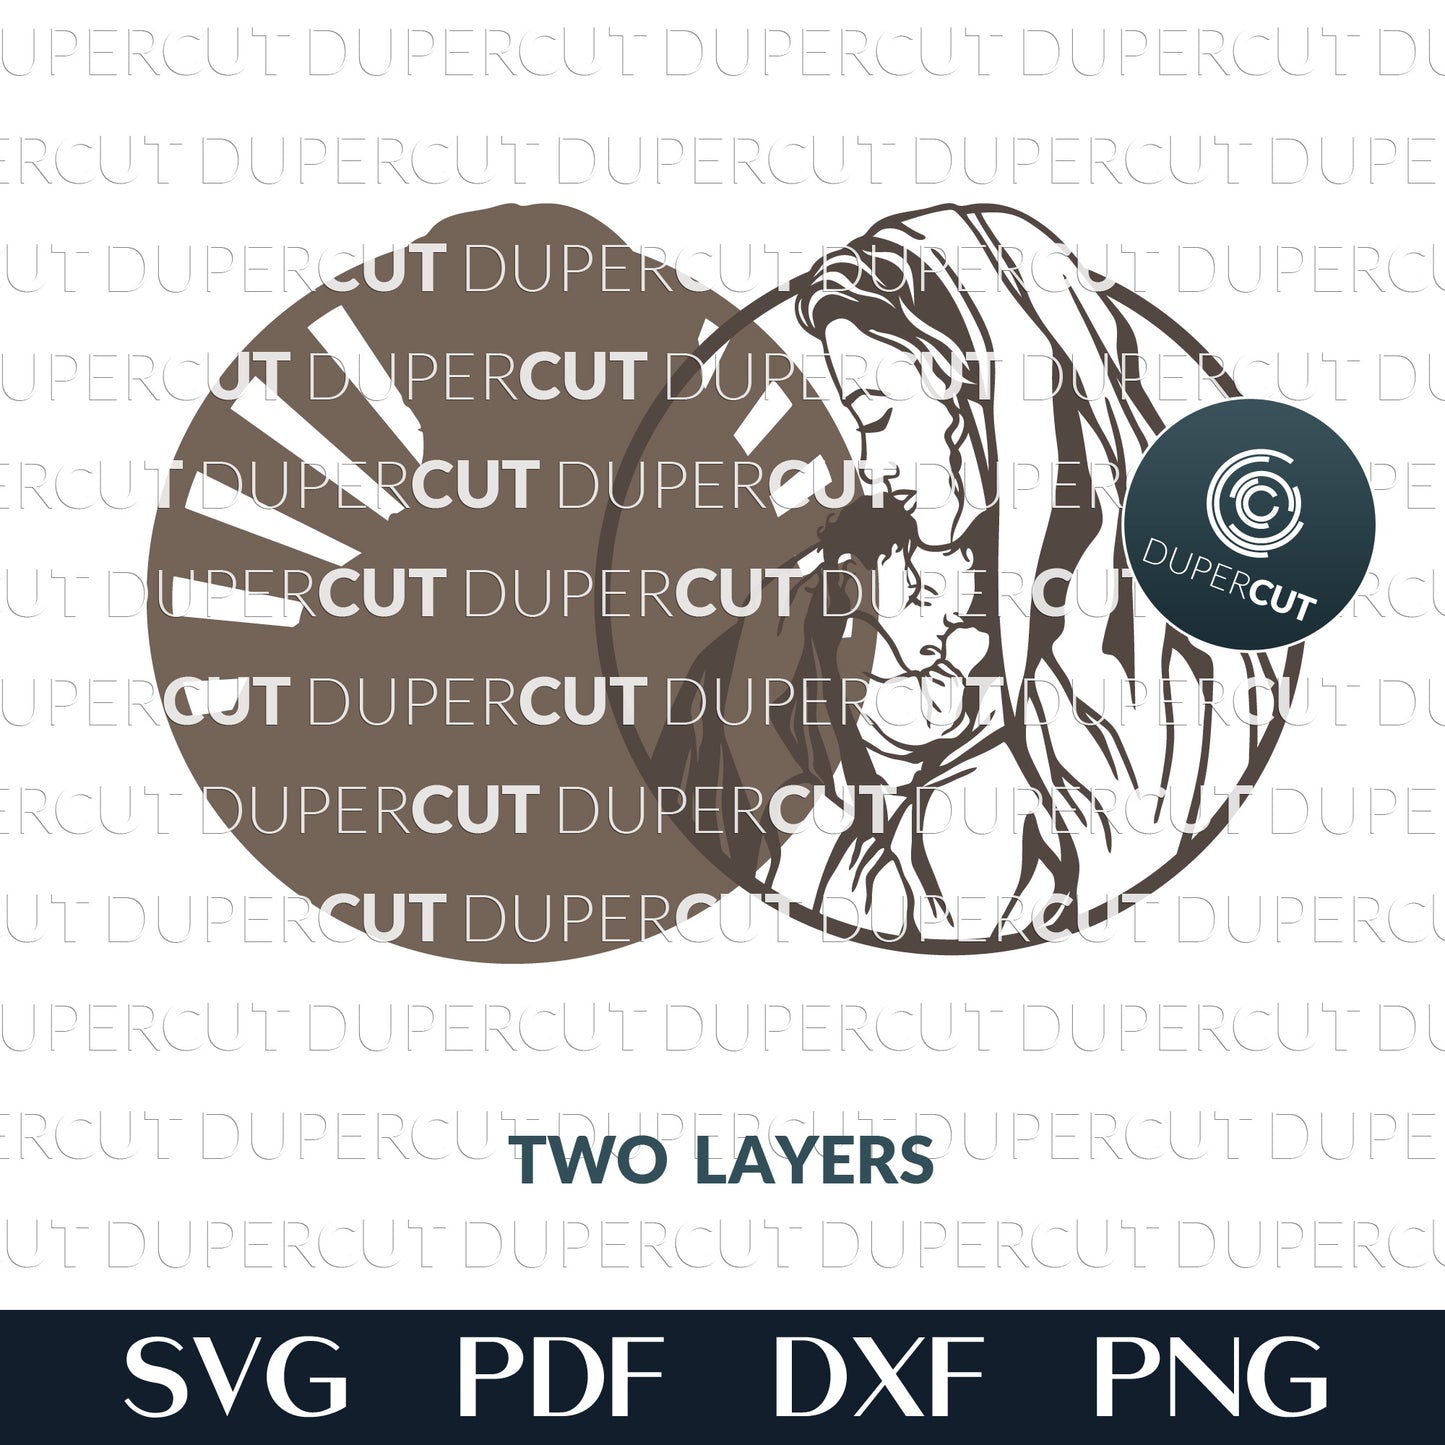 Virgin Mary holding baby Jesus - SVG DXF layered cutting files for Glowforge, Cricut, Silhouette, scroll saw pattern by DuperCut